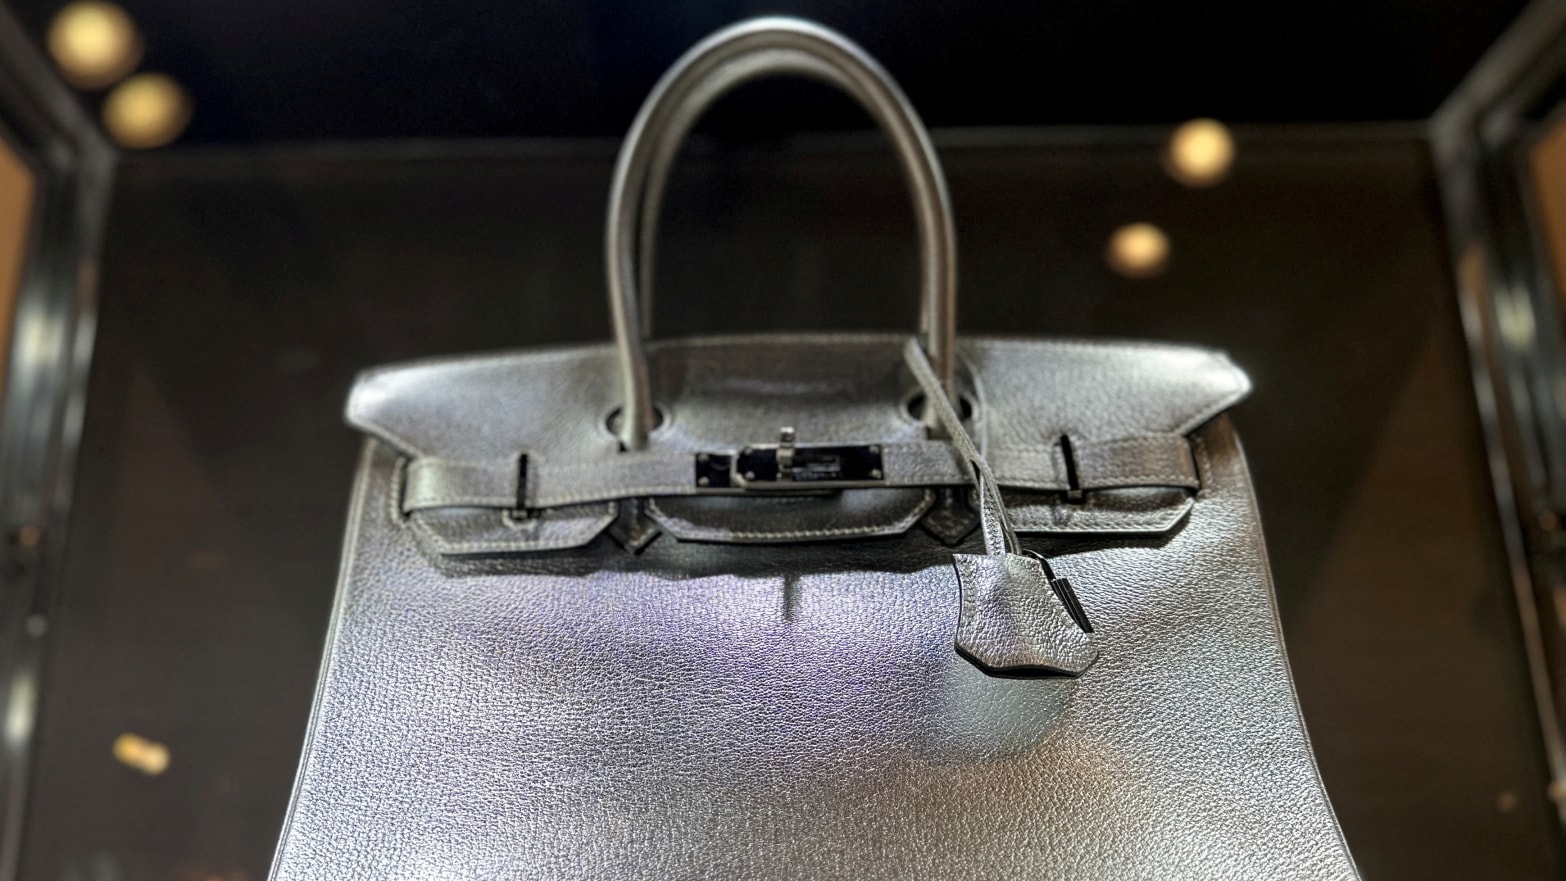 View of a Hermes Silver Metallic Chevre Birkin 30 bag up for auction at Sotheby's in New York City, U.S., June 1, 2023.